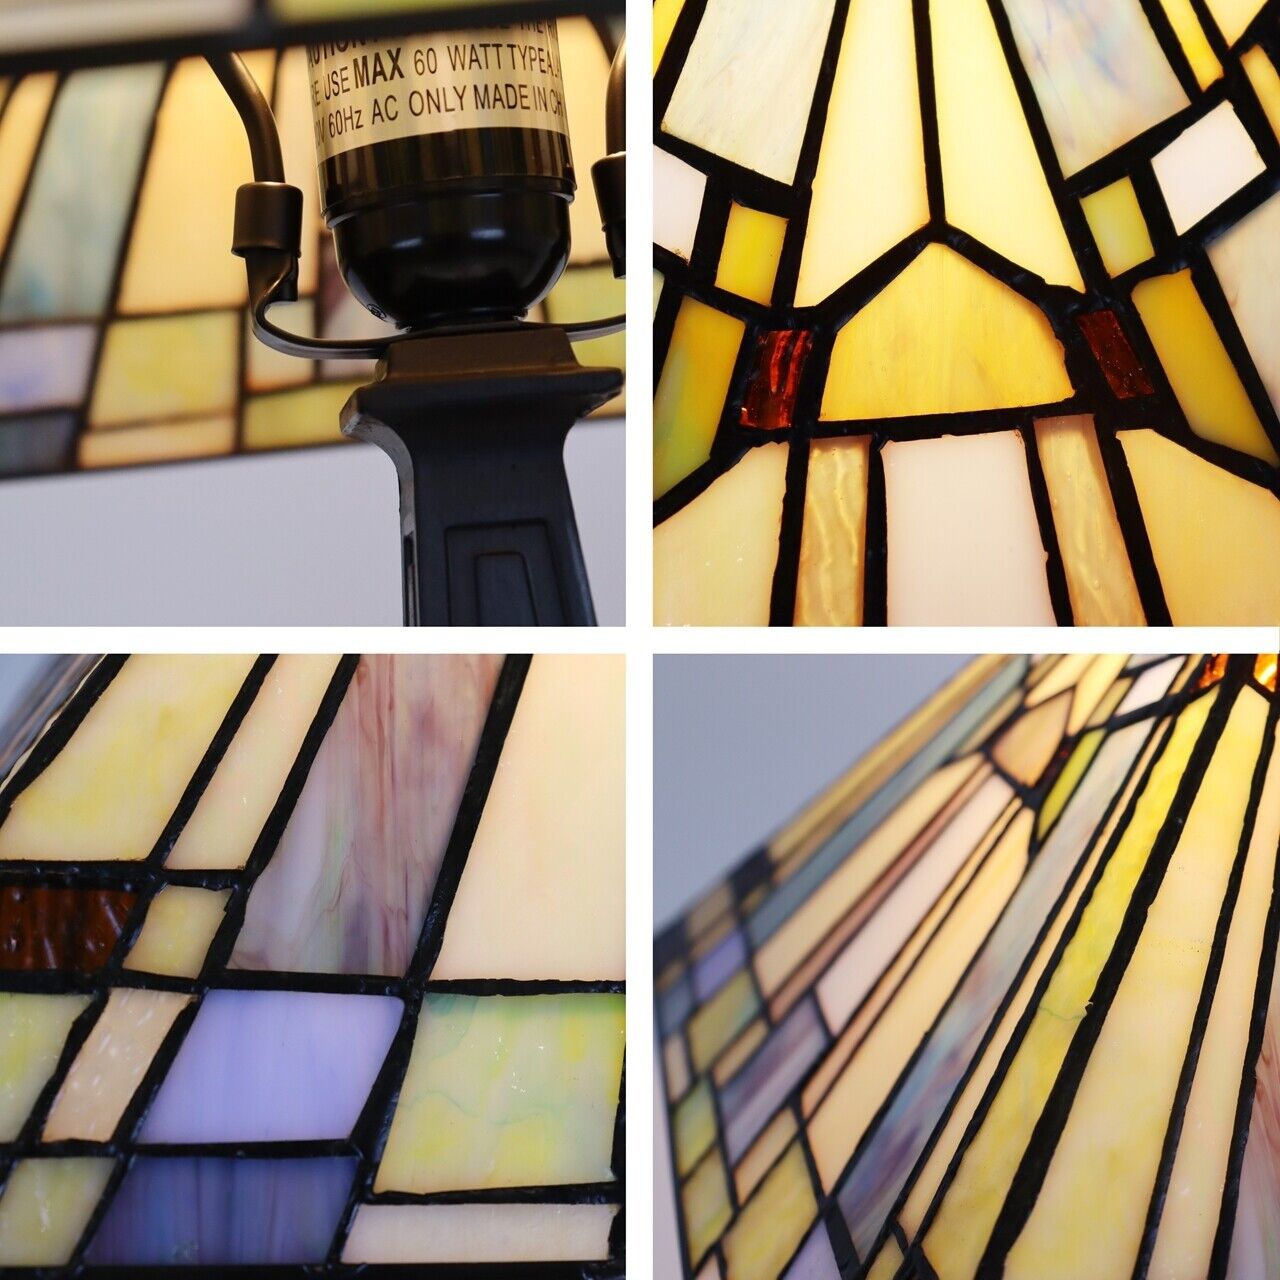 18" 1 light Antique Vintage Style Stained Glass Mission Table Lamp